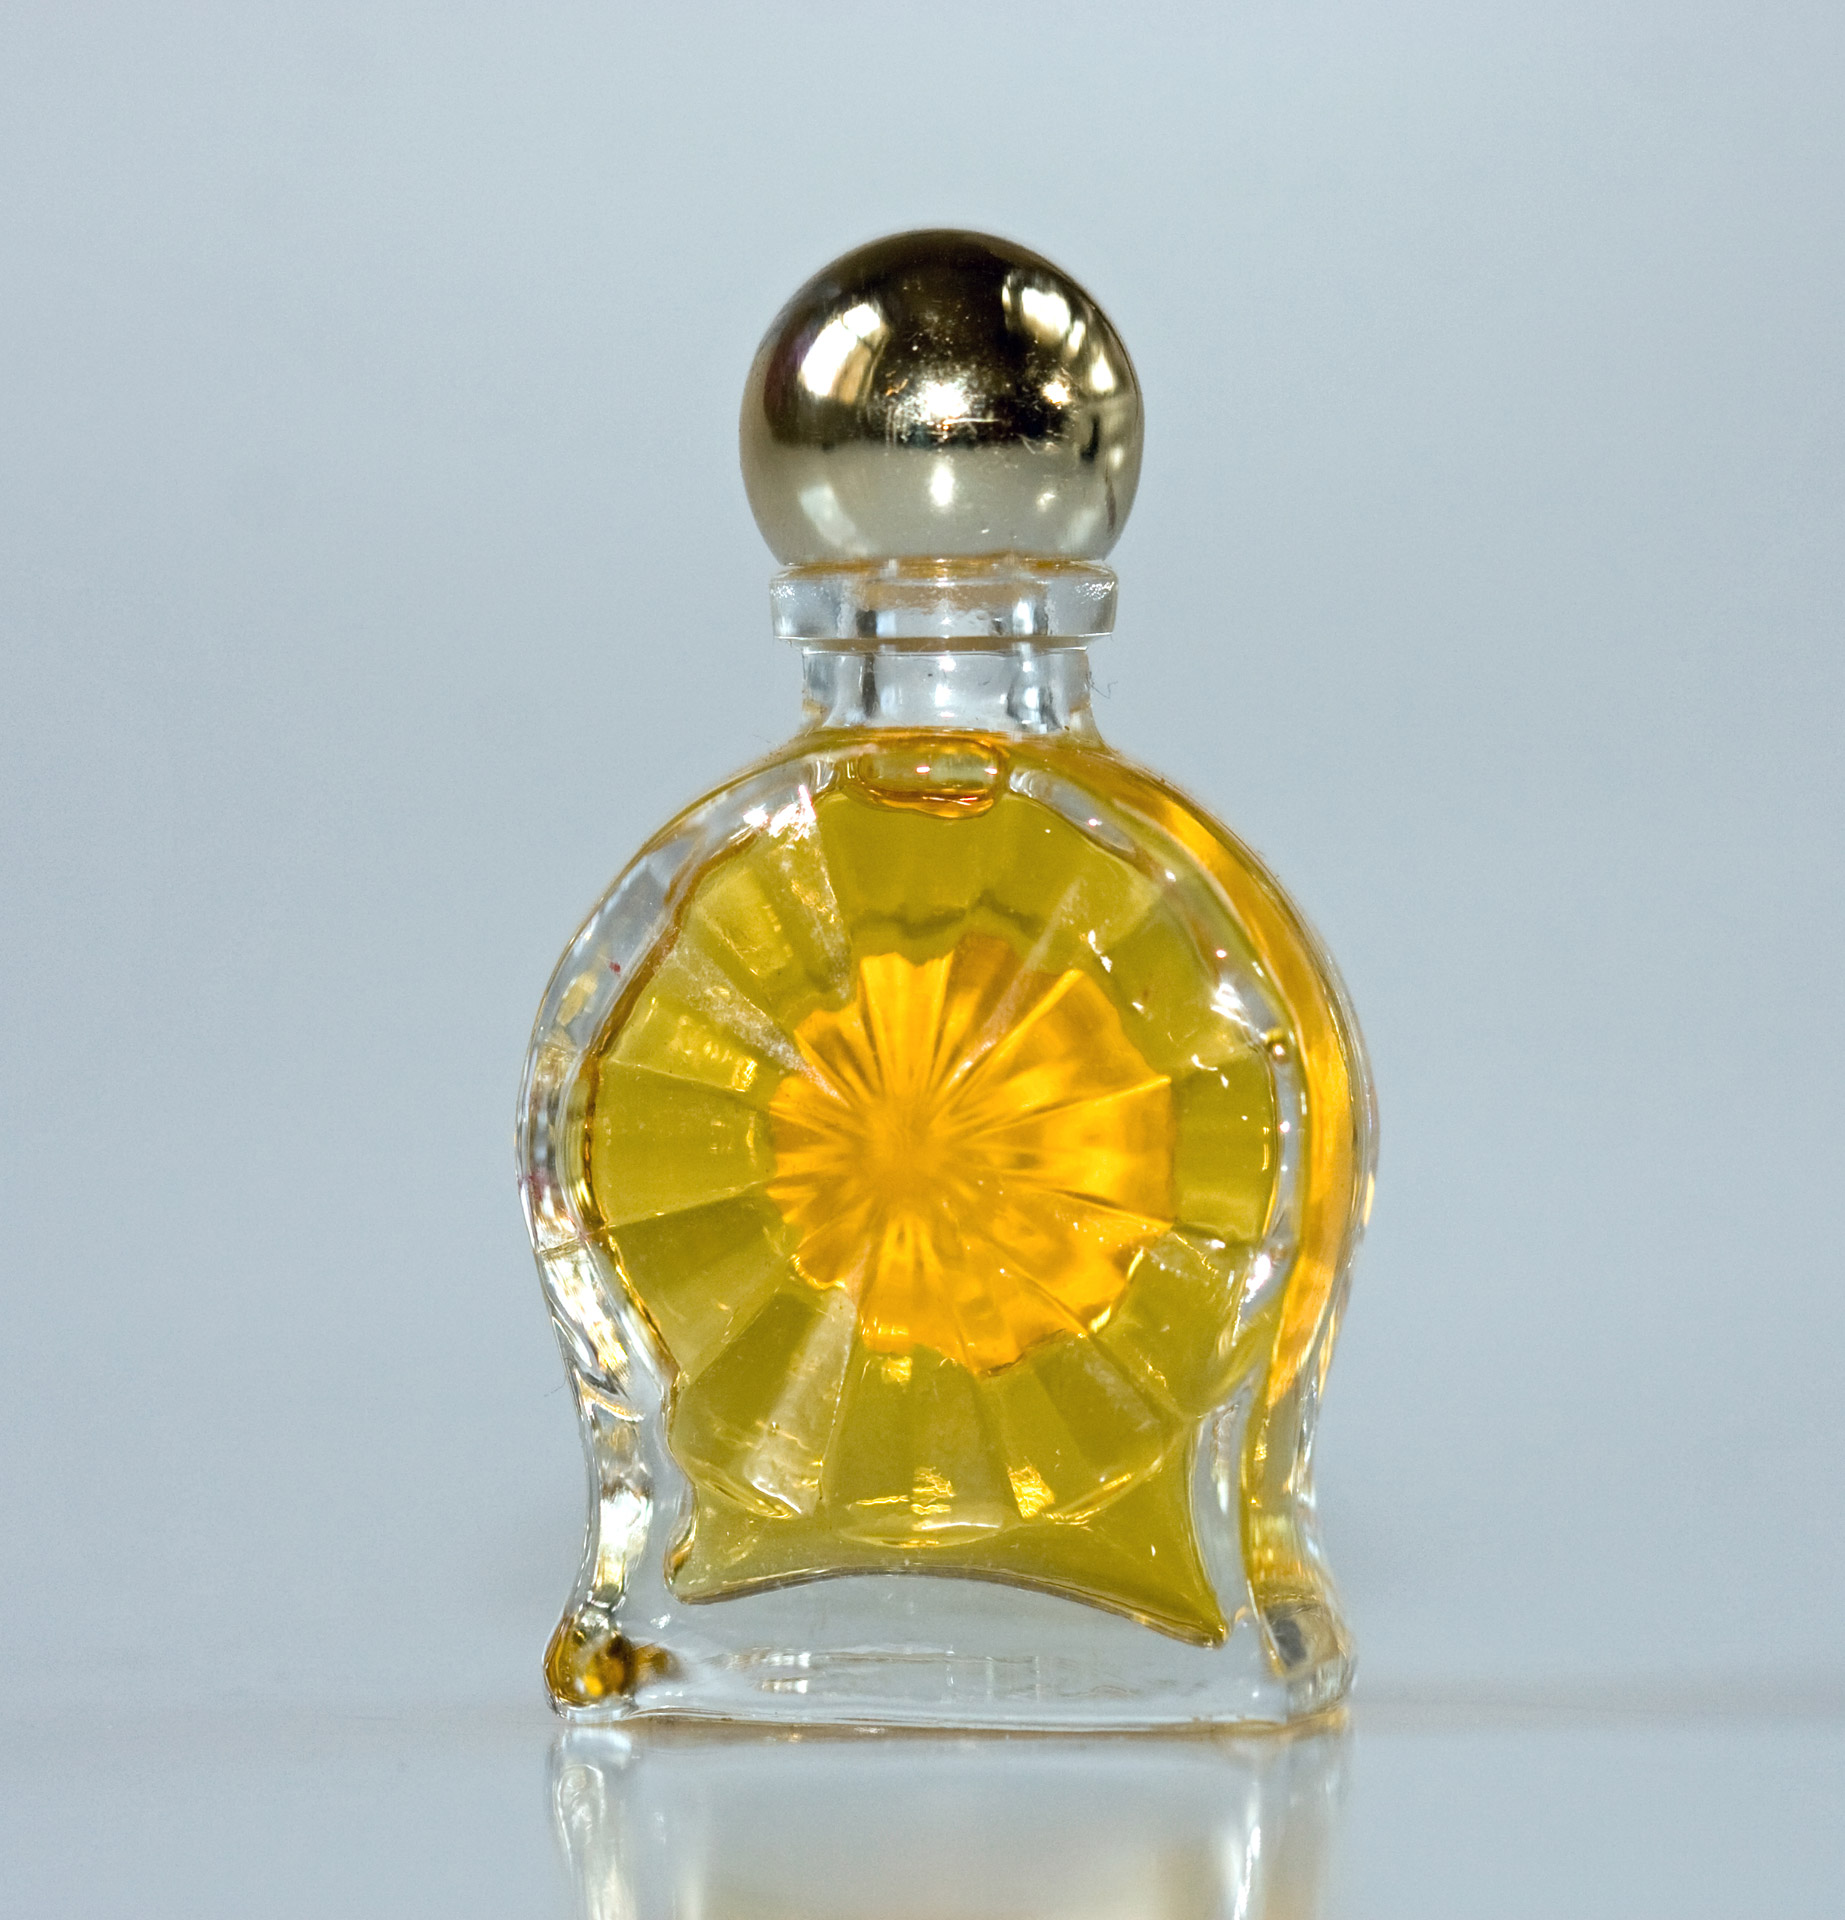 Glass Perfume Bottle Free Stock Photo - Public Domain Pictures